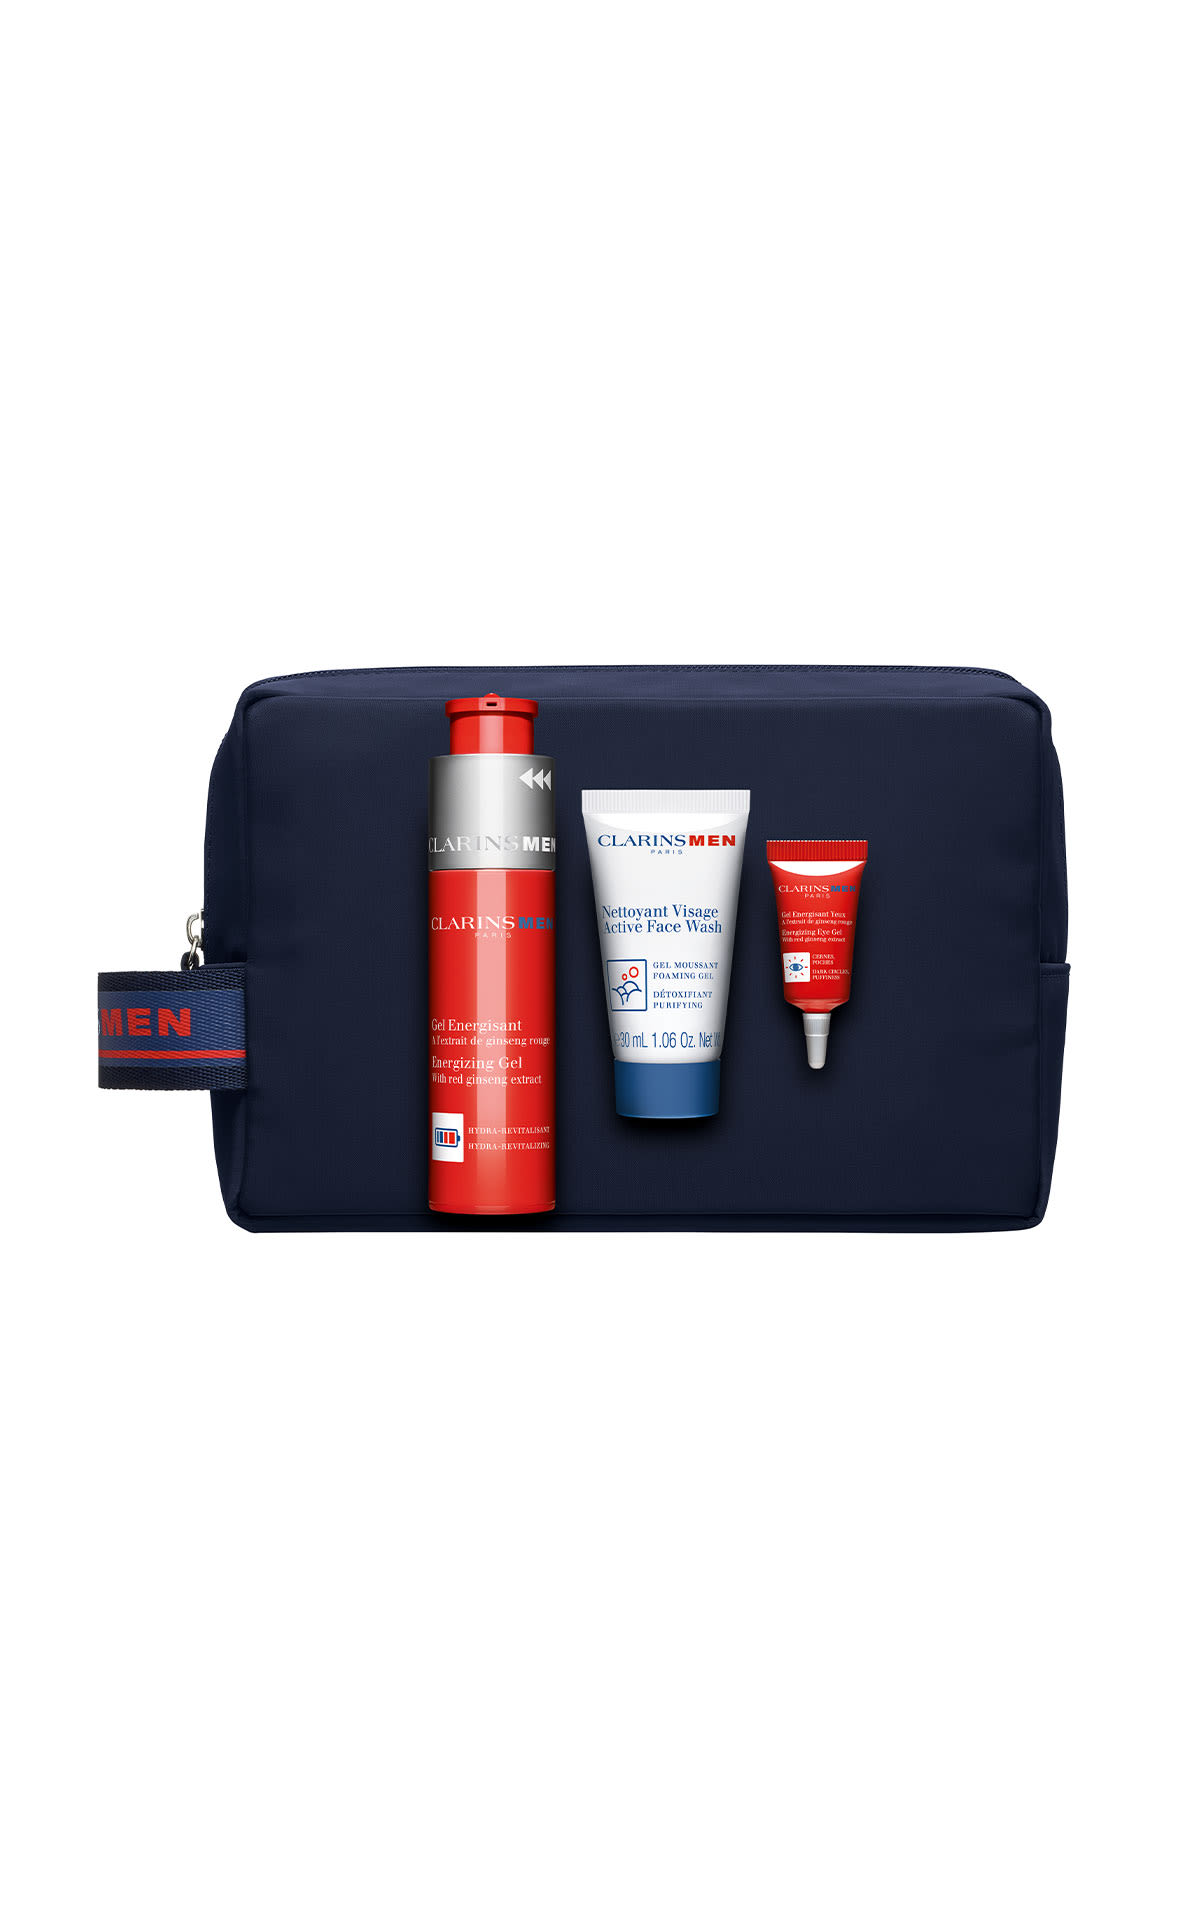 Clarins Mens energiser collection from Bicester Village